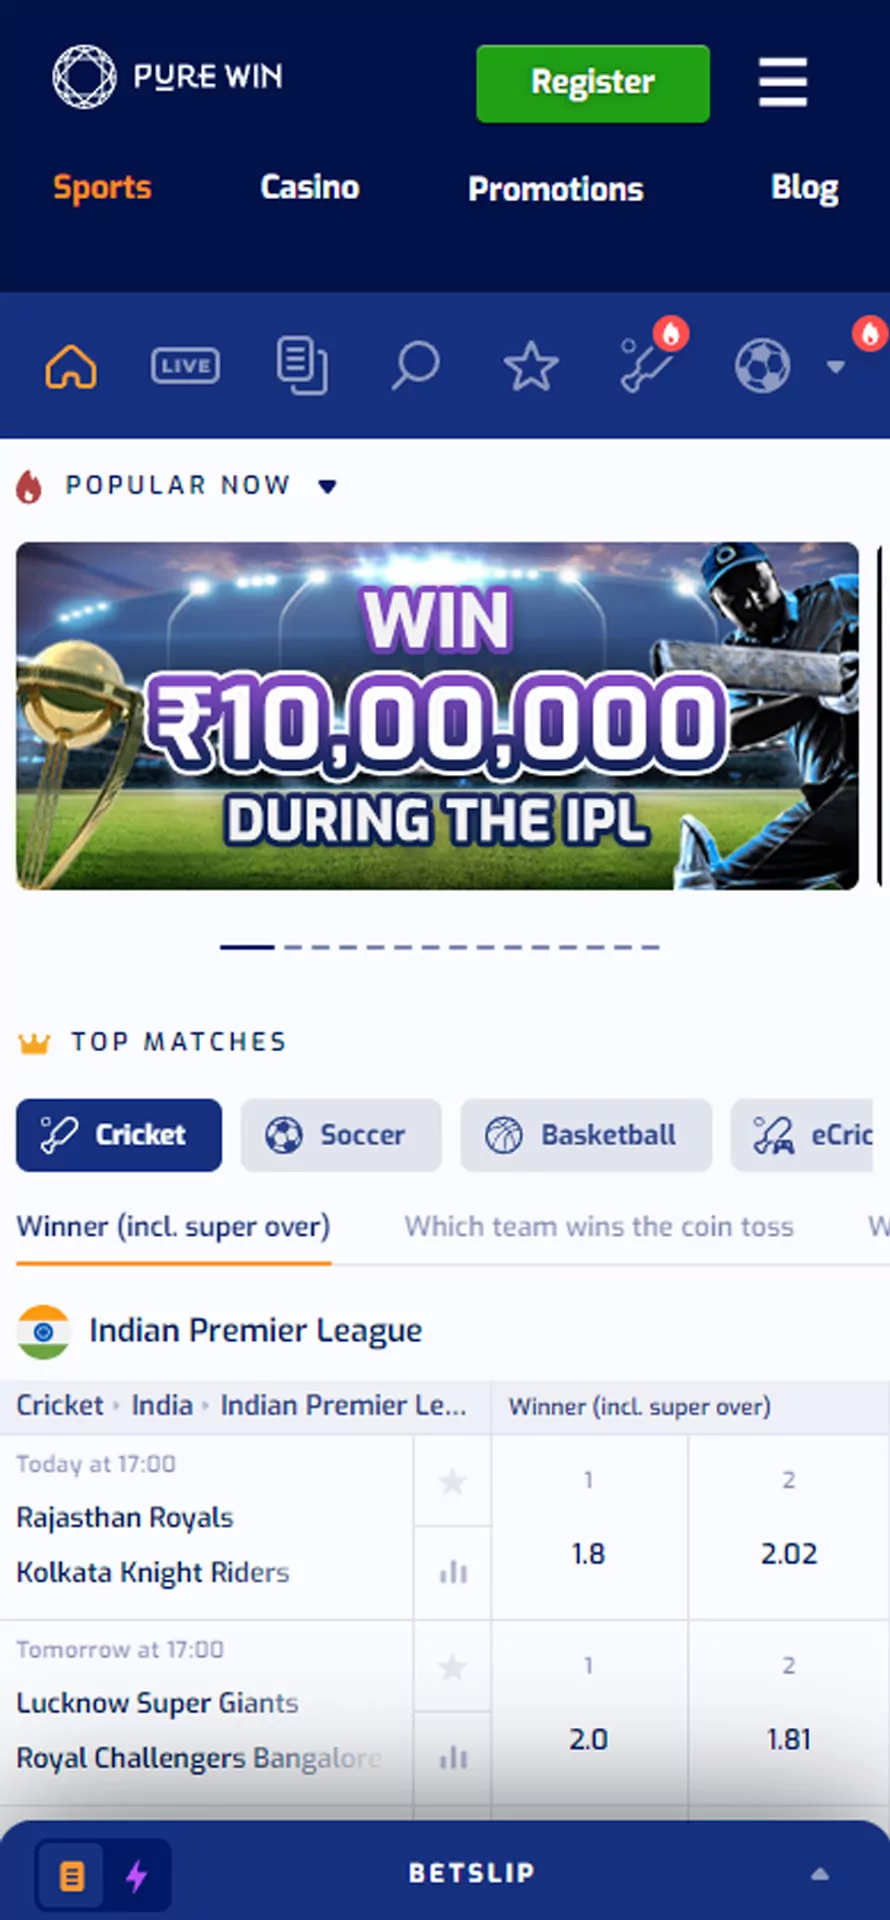 Bet on IPL matches at Pure Win.